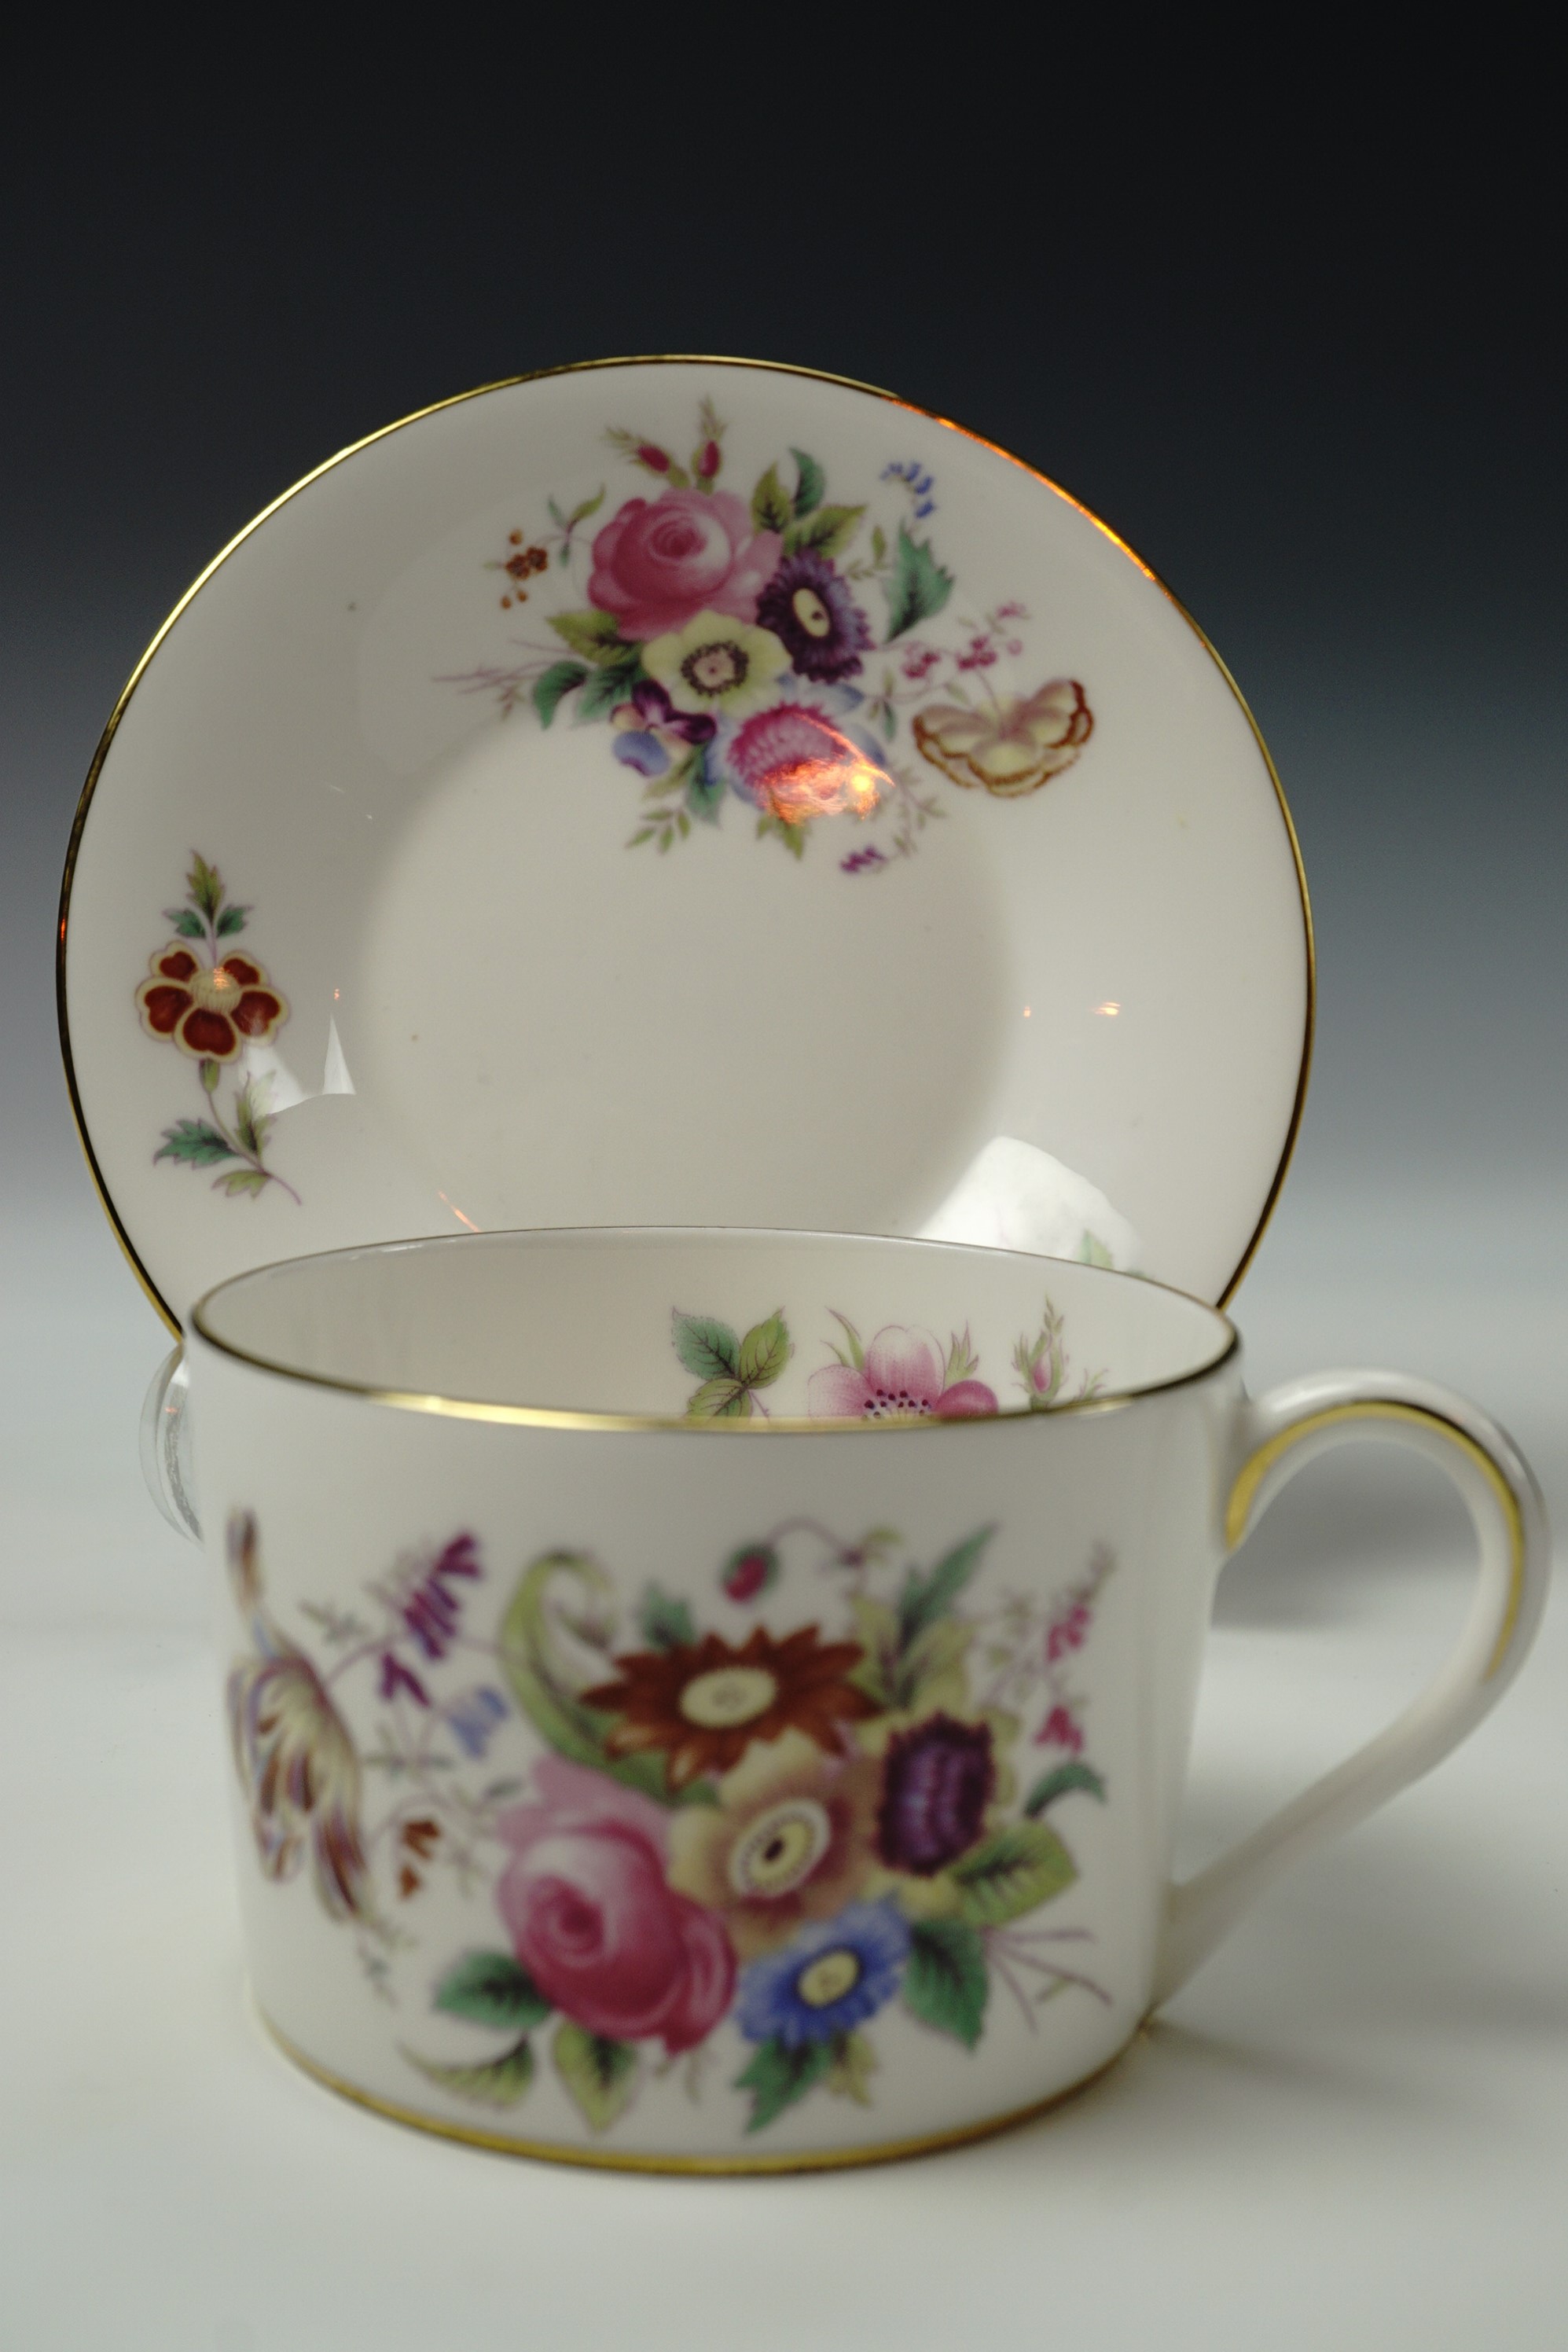 Six Coalport 'Junetime' teacups and saucers, white body with polychrome floral decoration inside and